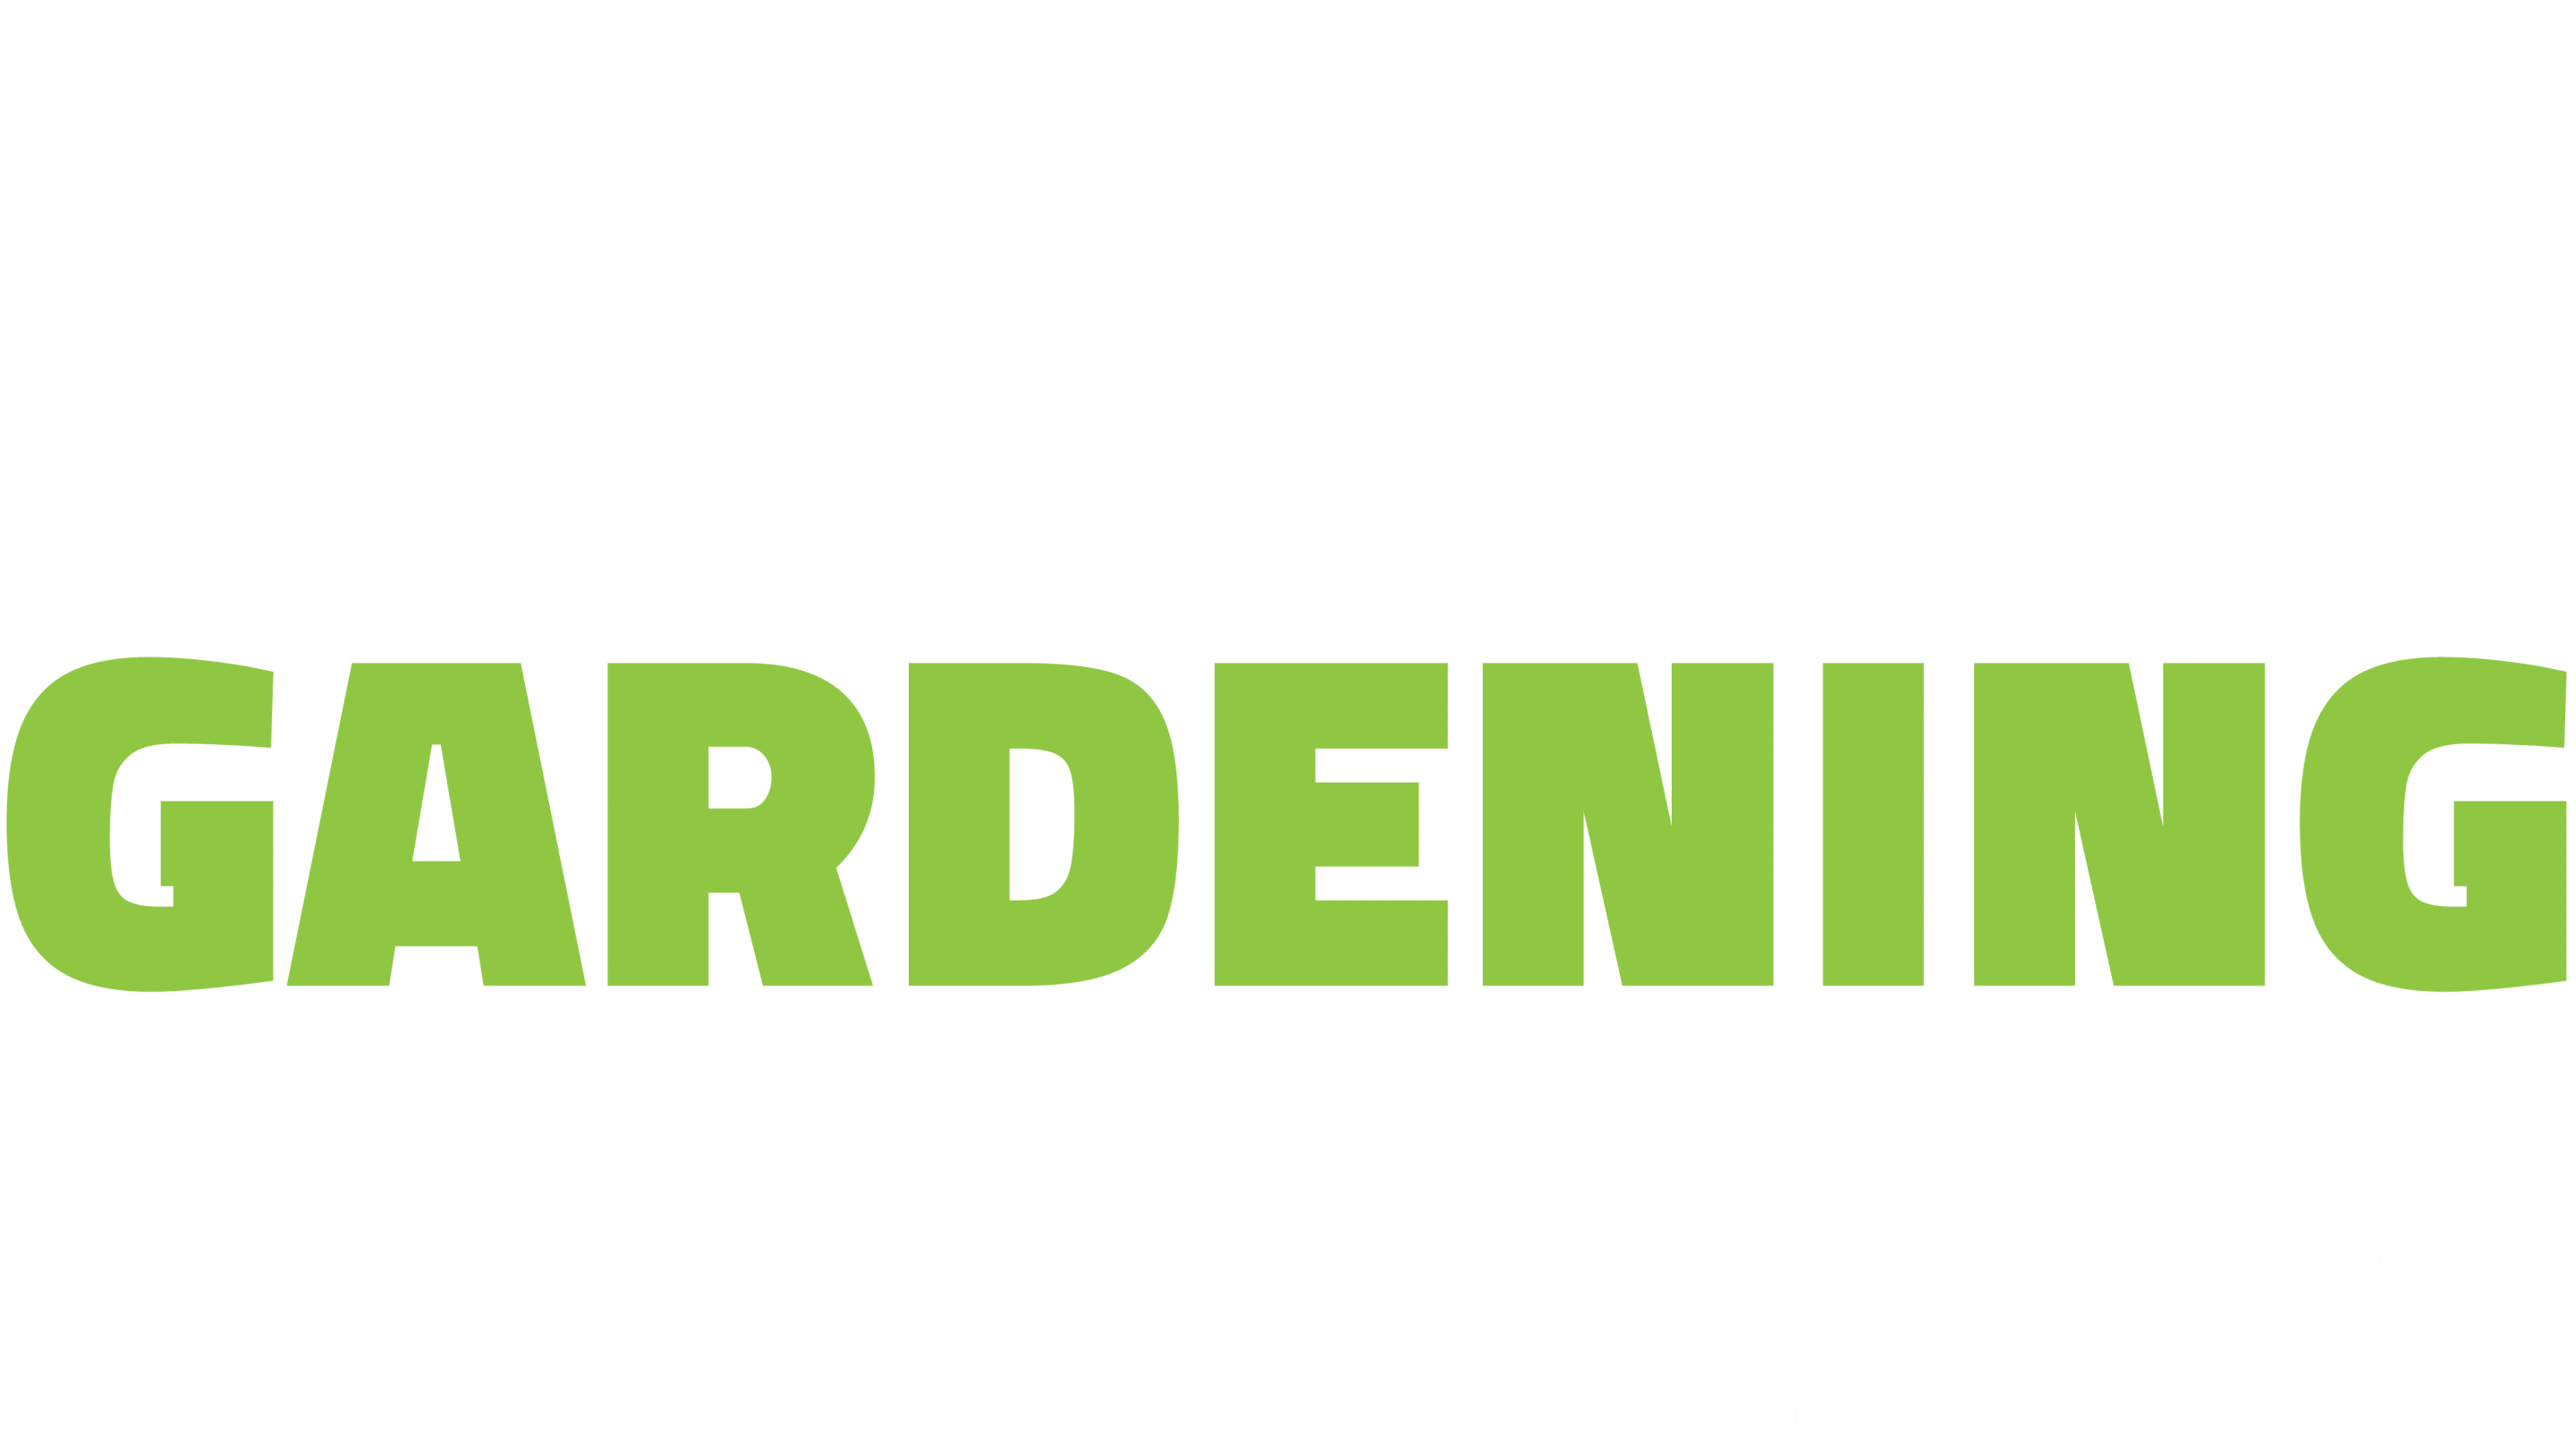 Gardening Services Perth - Local Gardeners Perth